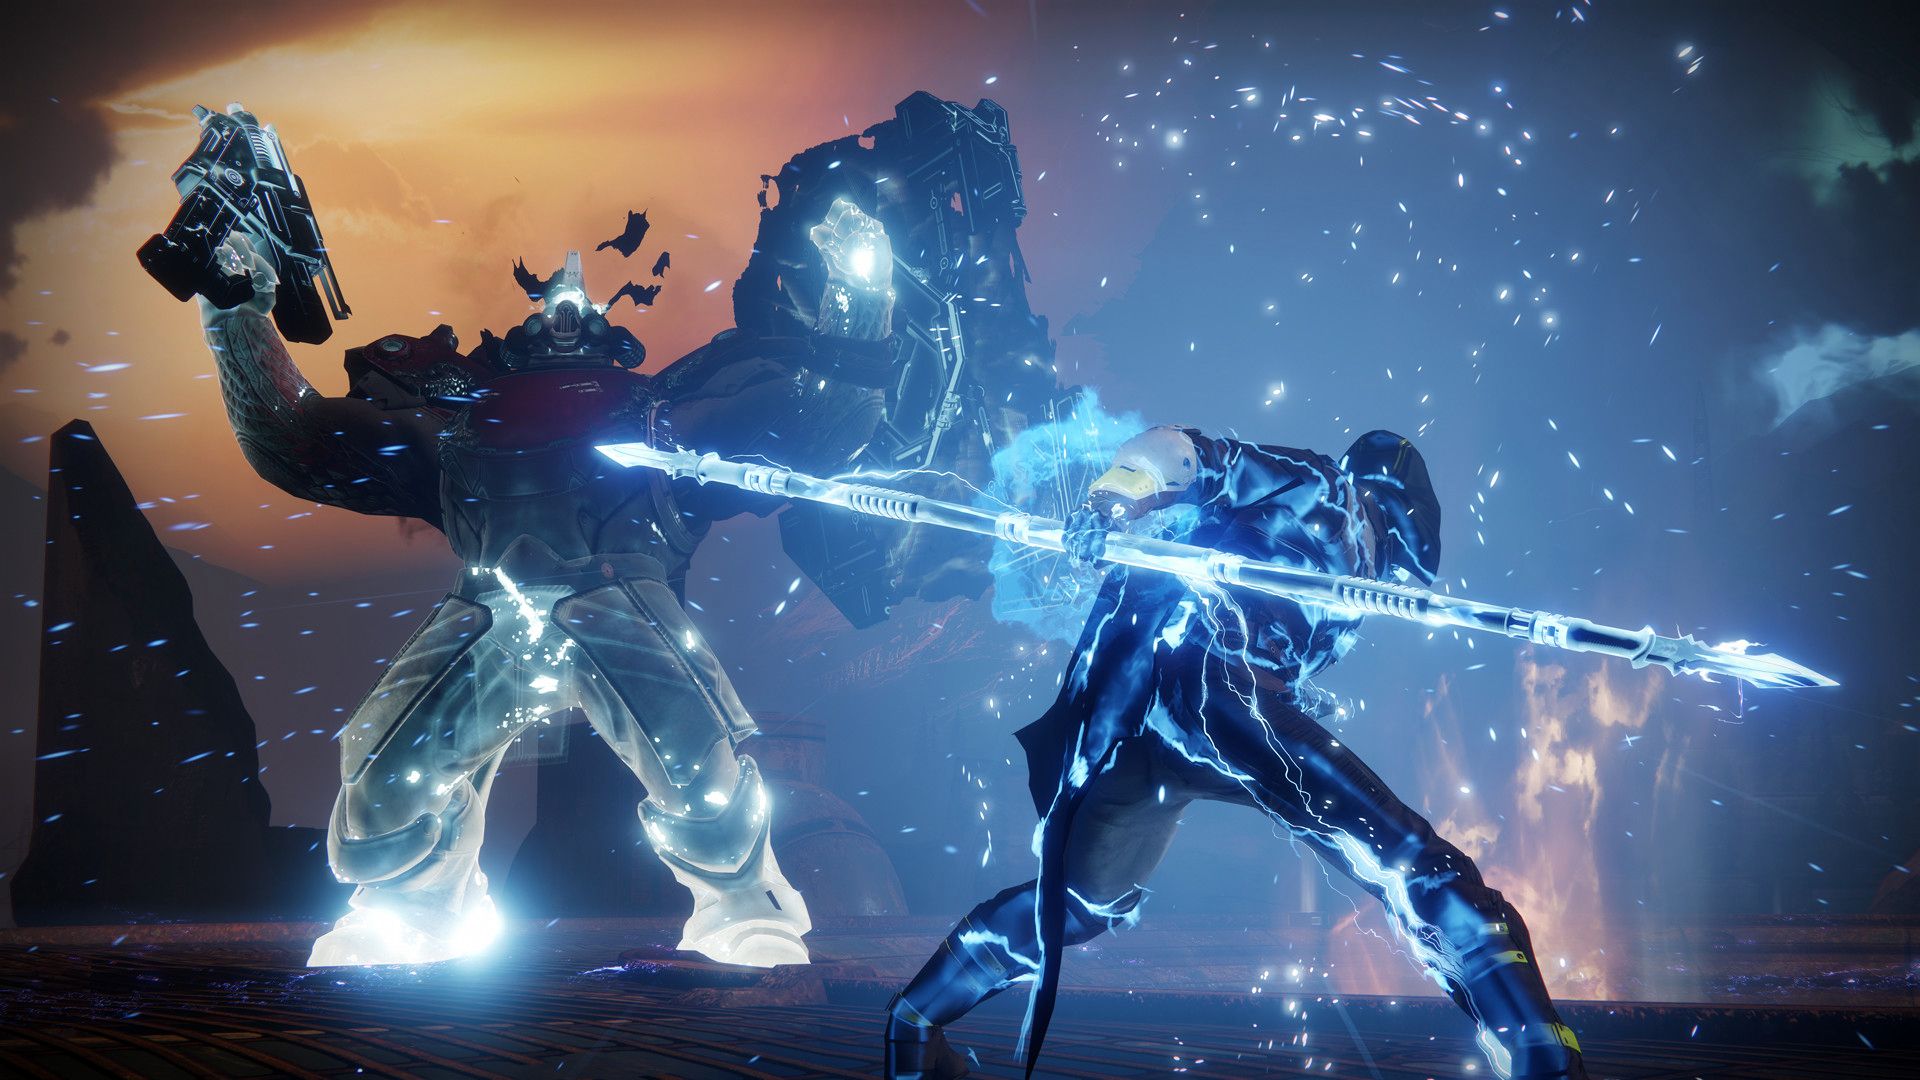 Destiny 2 classes: the Arcstrider Hunter subclass facing off against a boss